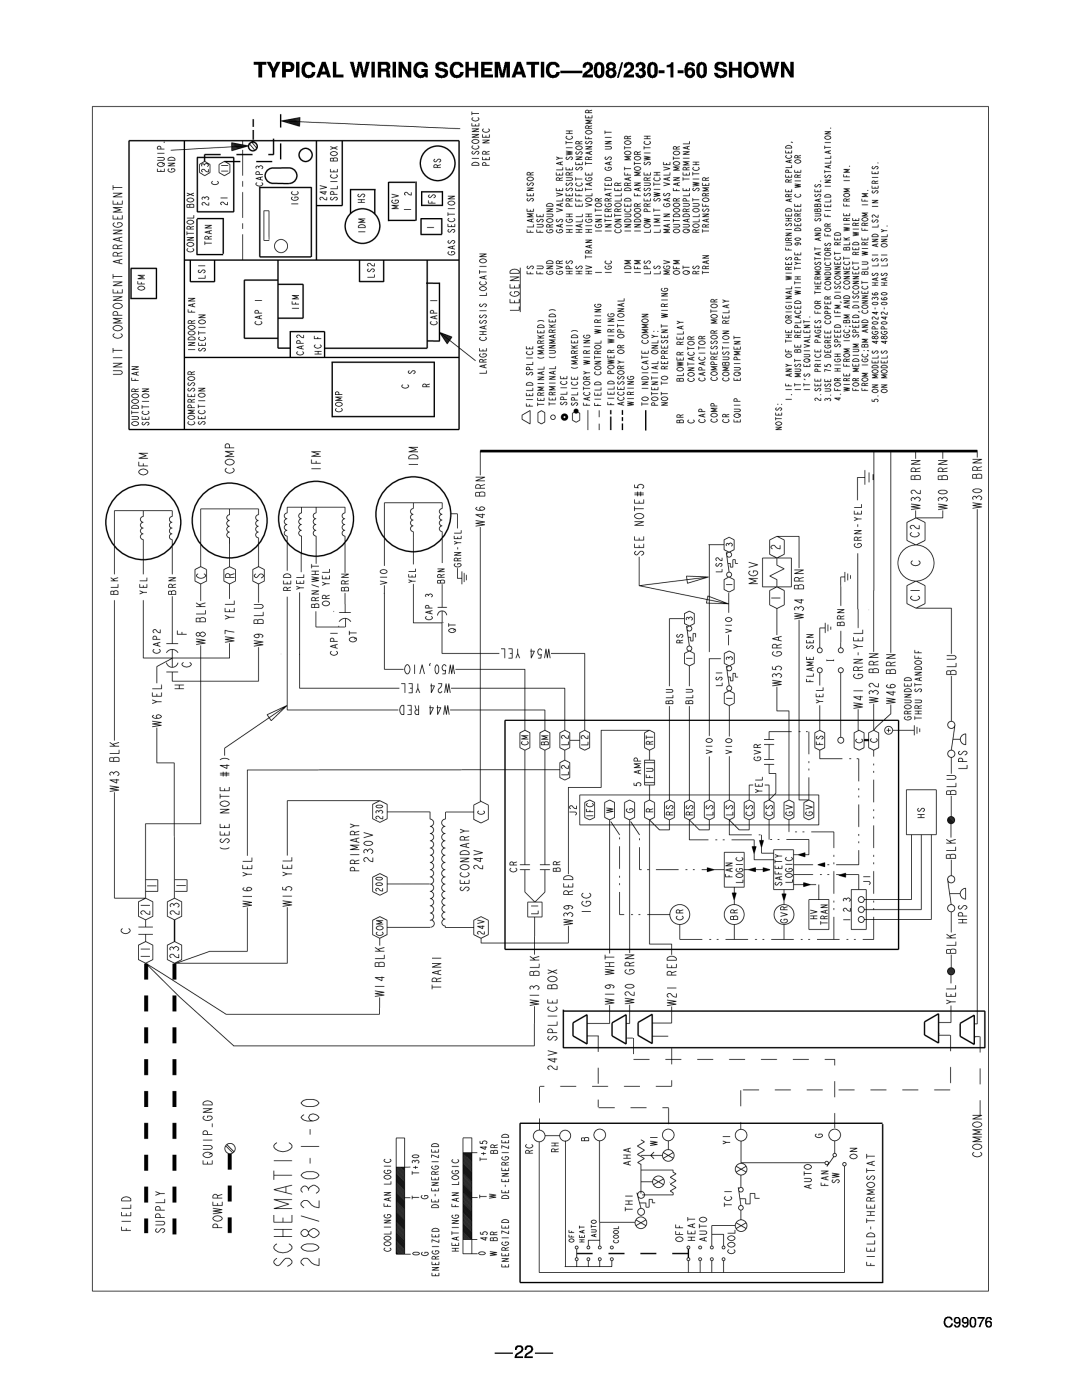 Bryant 583B manual TYPICAL WIRING SCHEMATIC-208/230-1-60SHOWN, C99076 